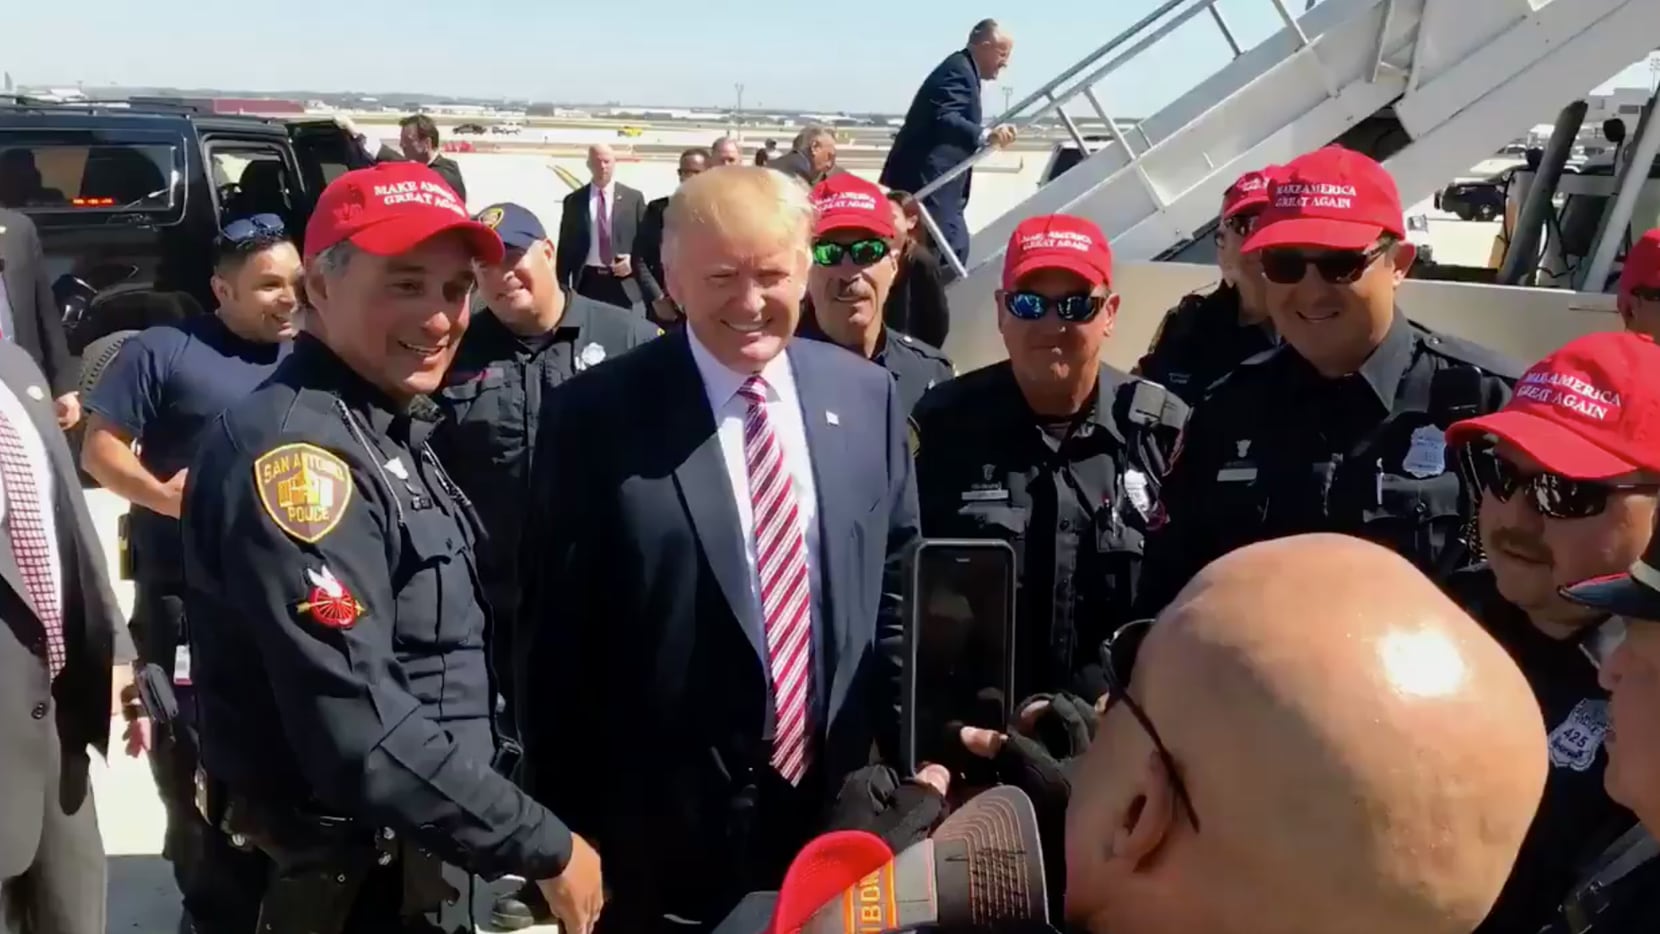 San Antonio police officers posed with Donald Trump after his campaign fundraiser Tuesday....